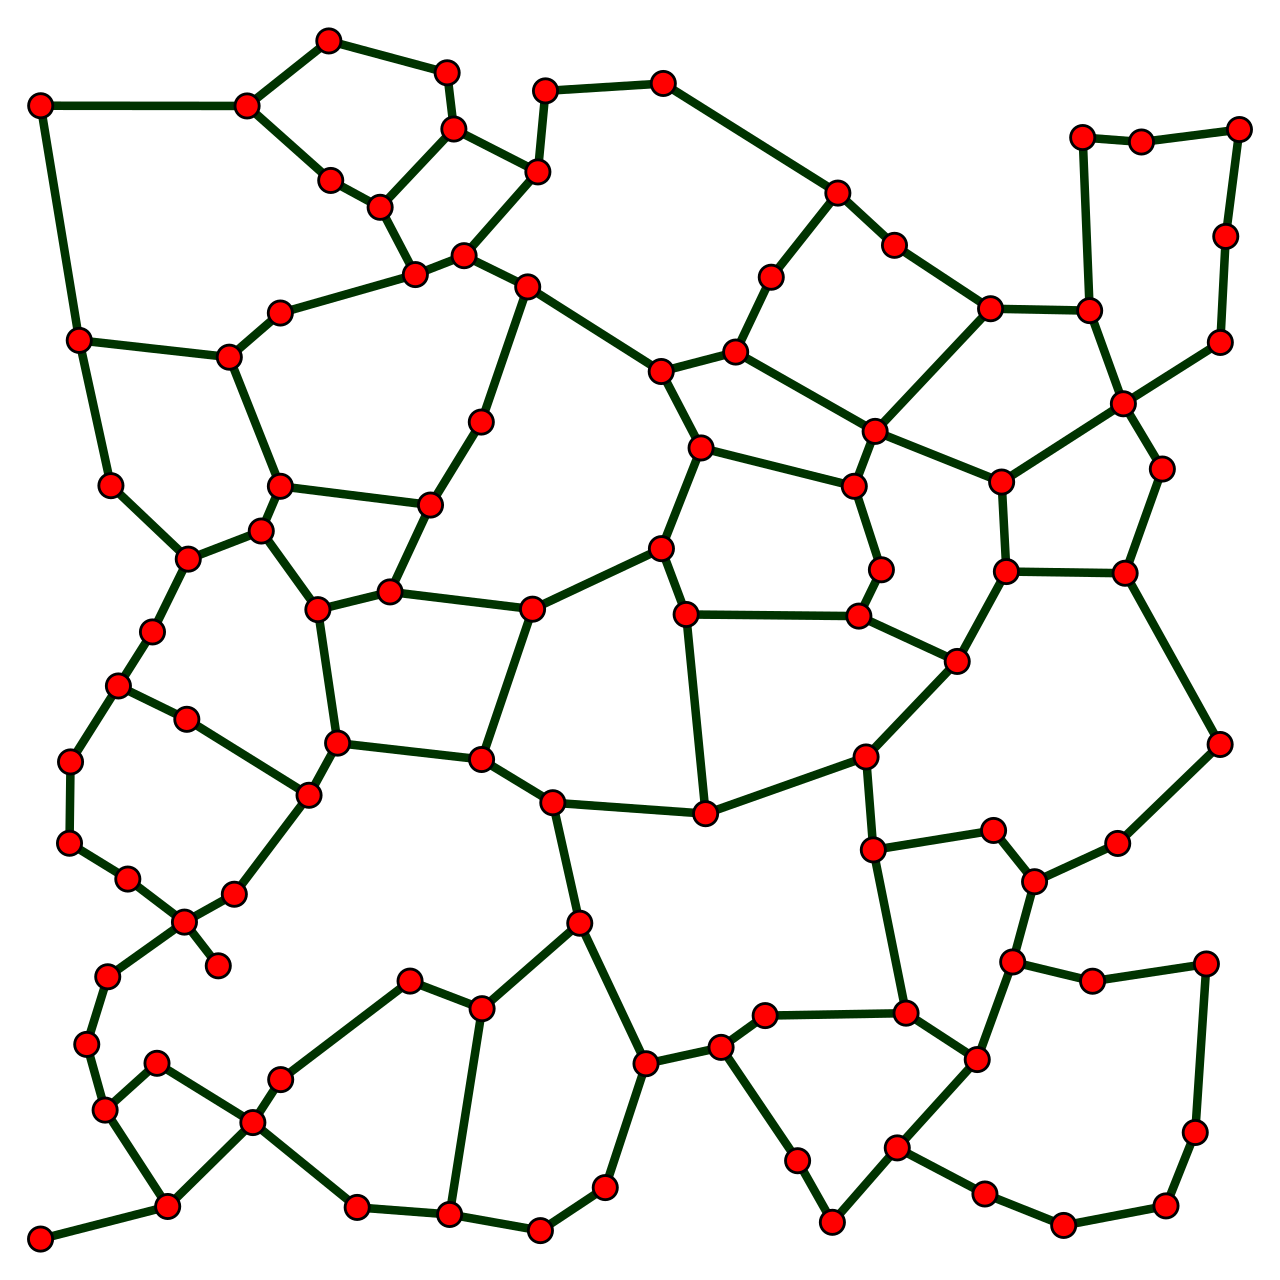 The relative neighborhood graph of 100 random points in a unit square